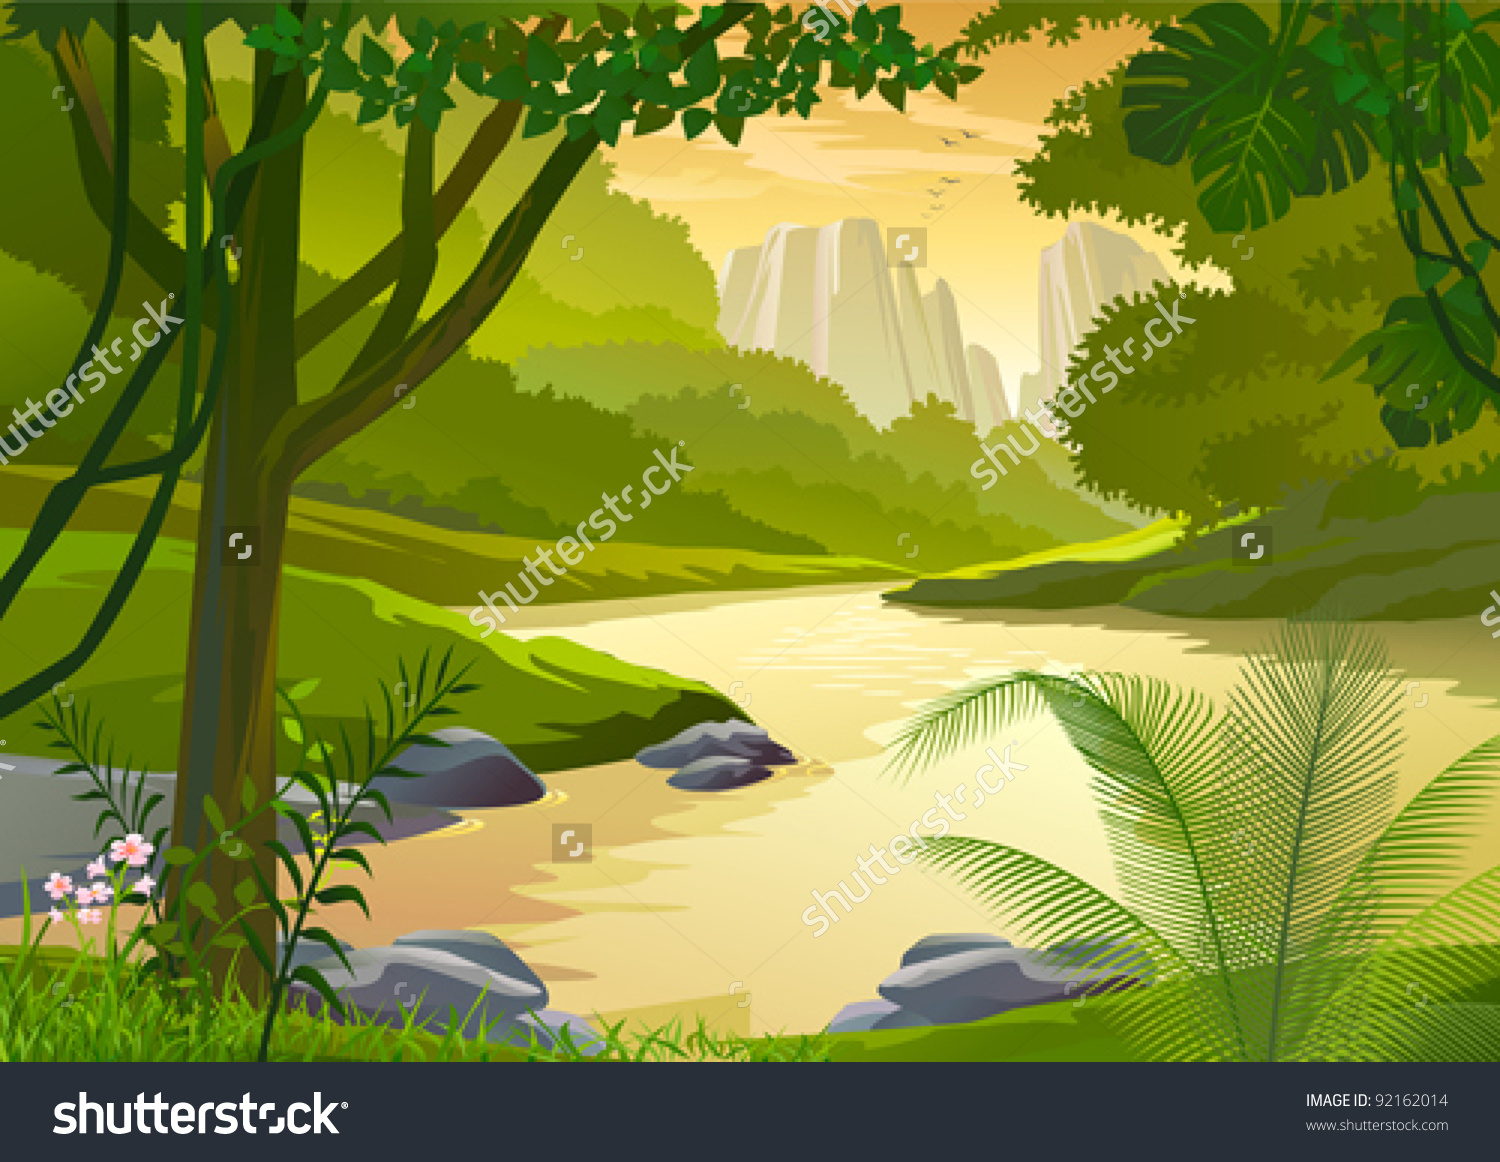 Water forest clipart - Clipground